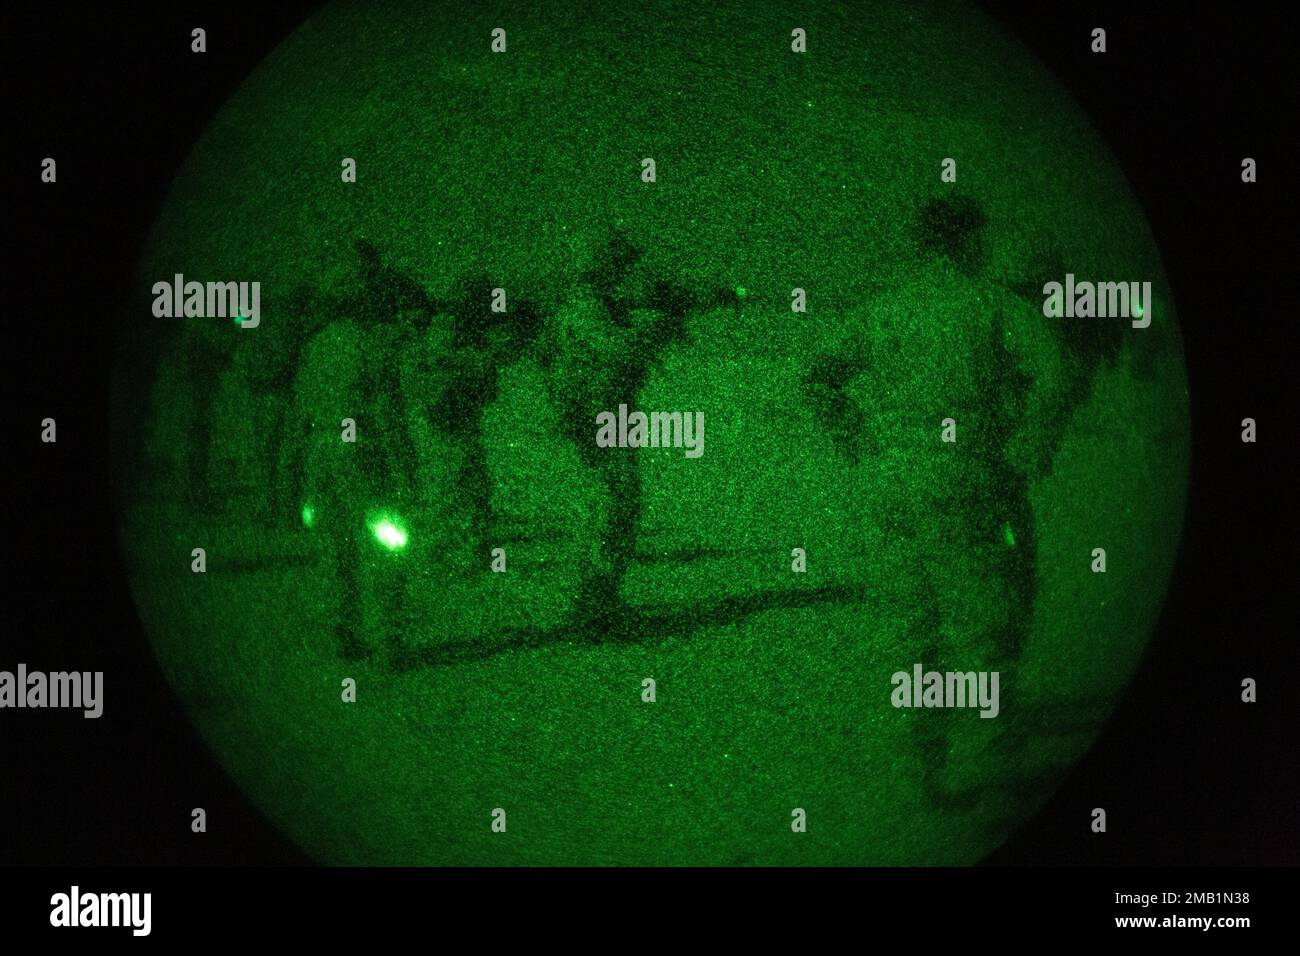 U.S. Marines with the 13th Marine Expeditionary Unit, use a PVS-14 Night Vision Monocular device to locate and fire at targets for rifle qualification tables 3-6 during a Realistic Urban Training exercise at Marine Corp Air Ground Combat Center Twentynine Palms on June 9, 2022. The 13th MEU is currently conducting RUT exercise to enhance the integration and collective capability of the MEU’s command, air, ground, and logistics elements and prepare the 13th MEU to meet the nation’s crisis response needs during their upcoming overseas deployment. Stock Photo